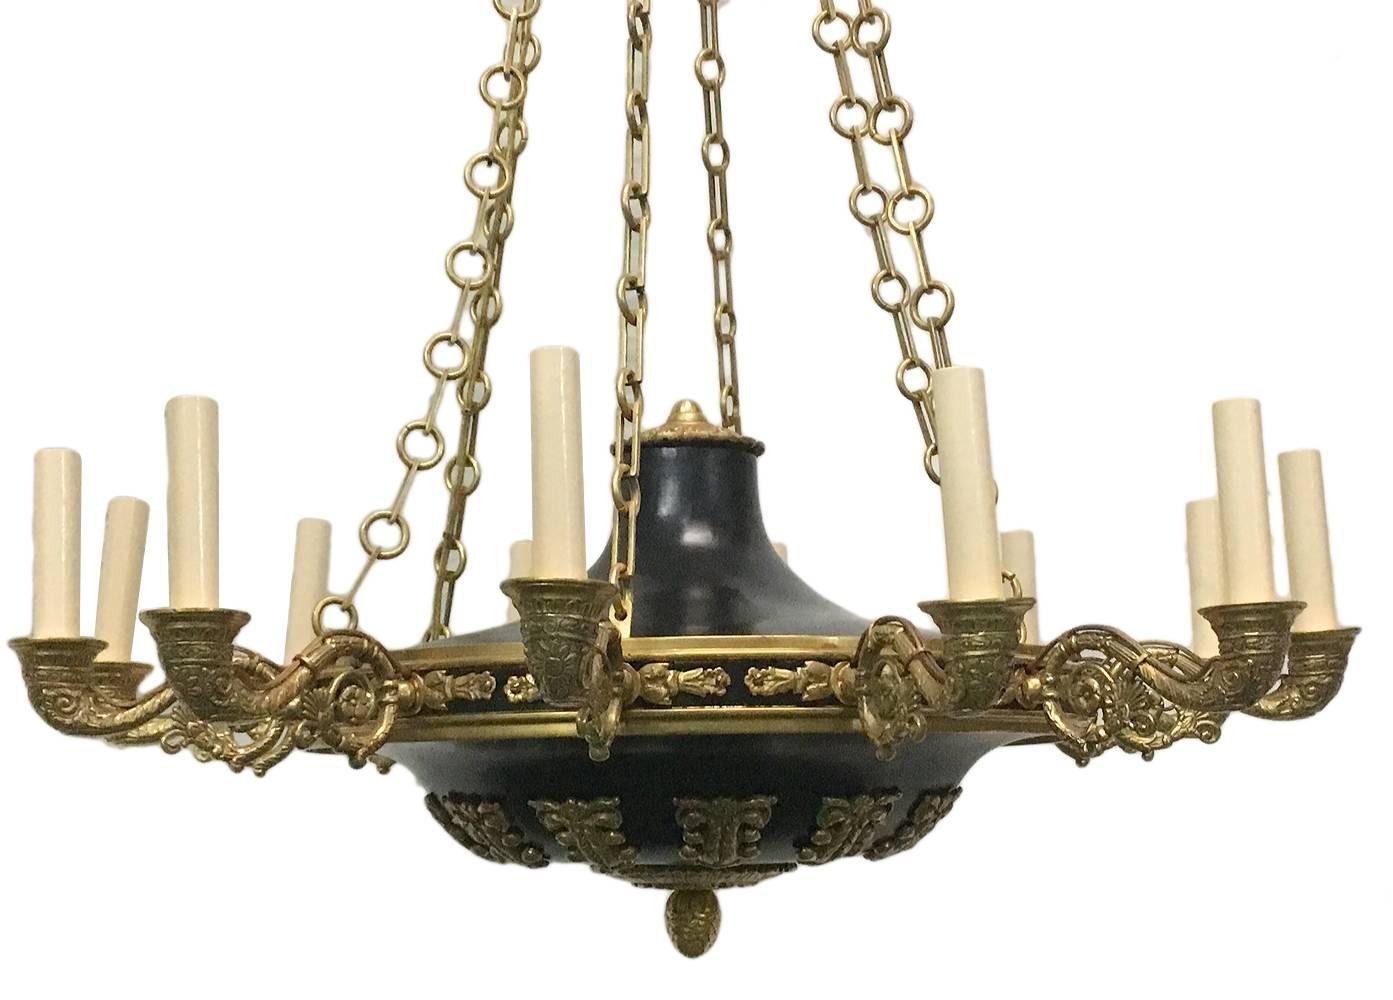 A twelve -arm French Empire-style gilt bronze and tole chandelier with foliage motif, circa 1940s.

Measurements:
Diameter 31